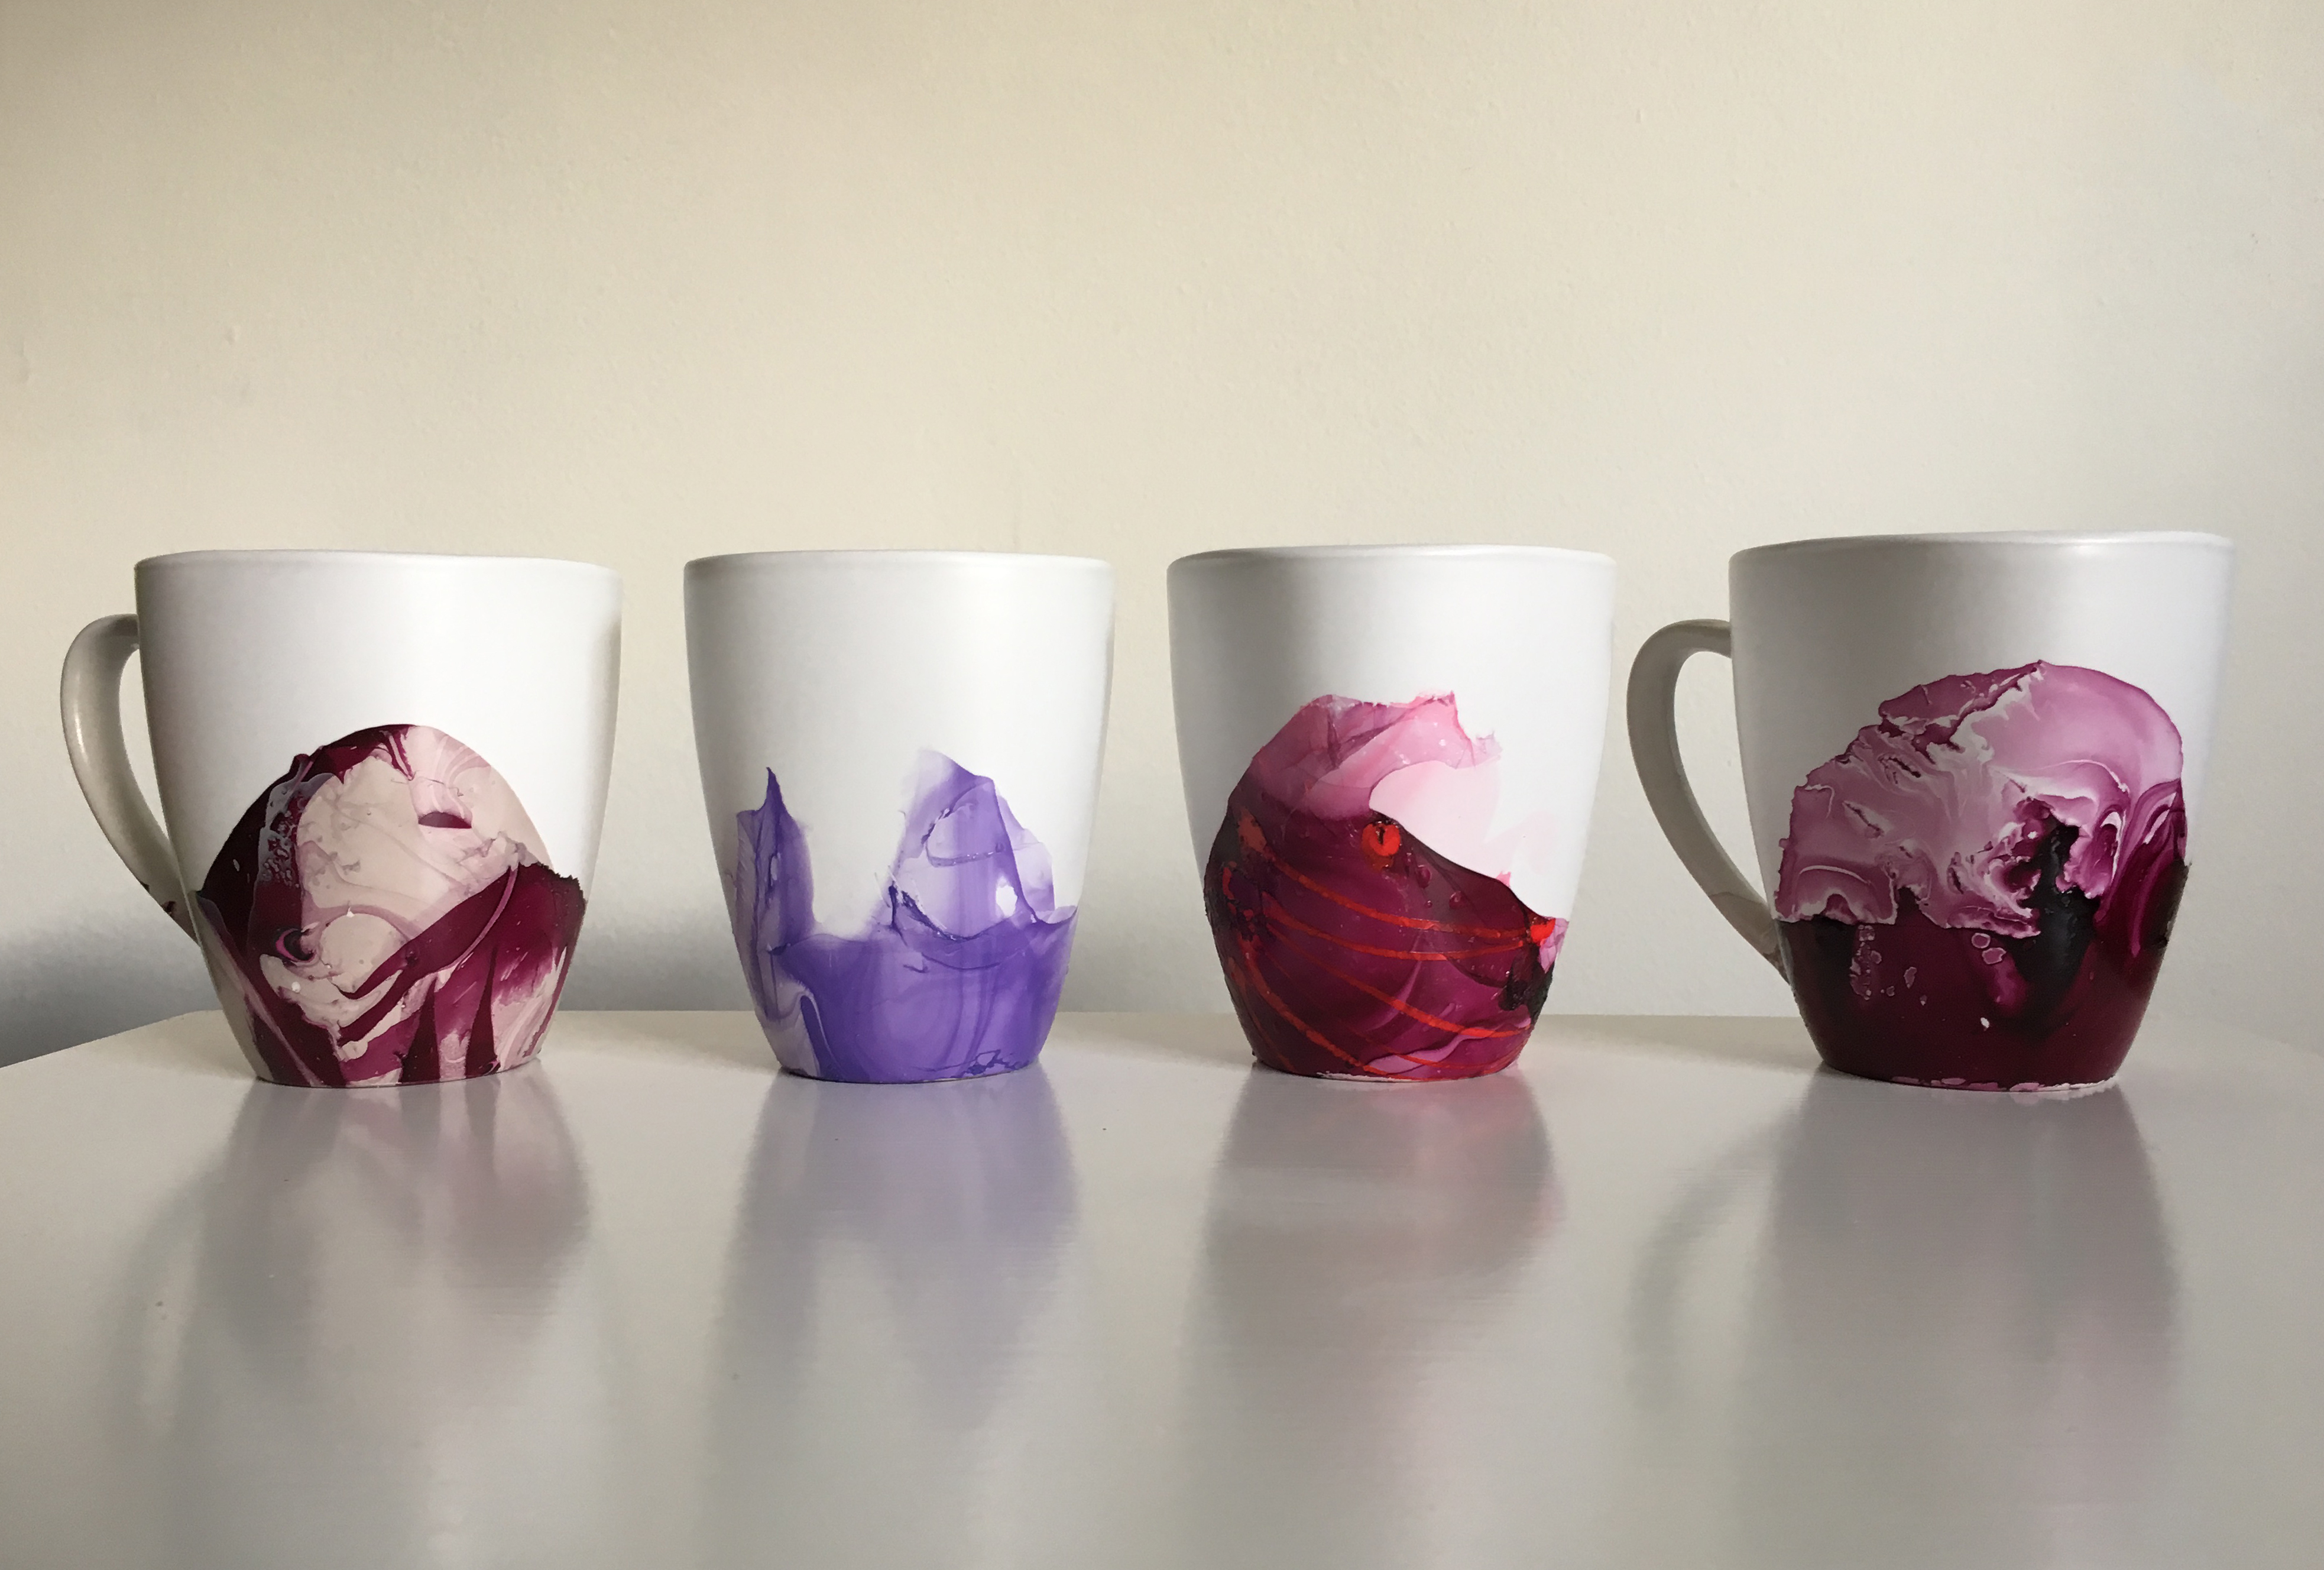 image of four coffee mugs with unique, marbled-style designs